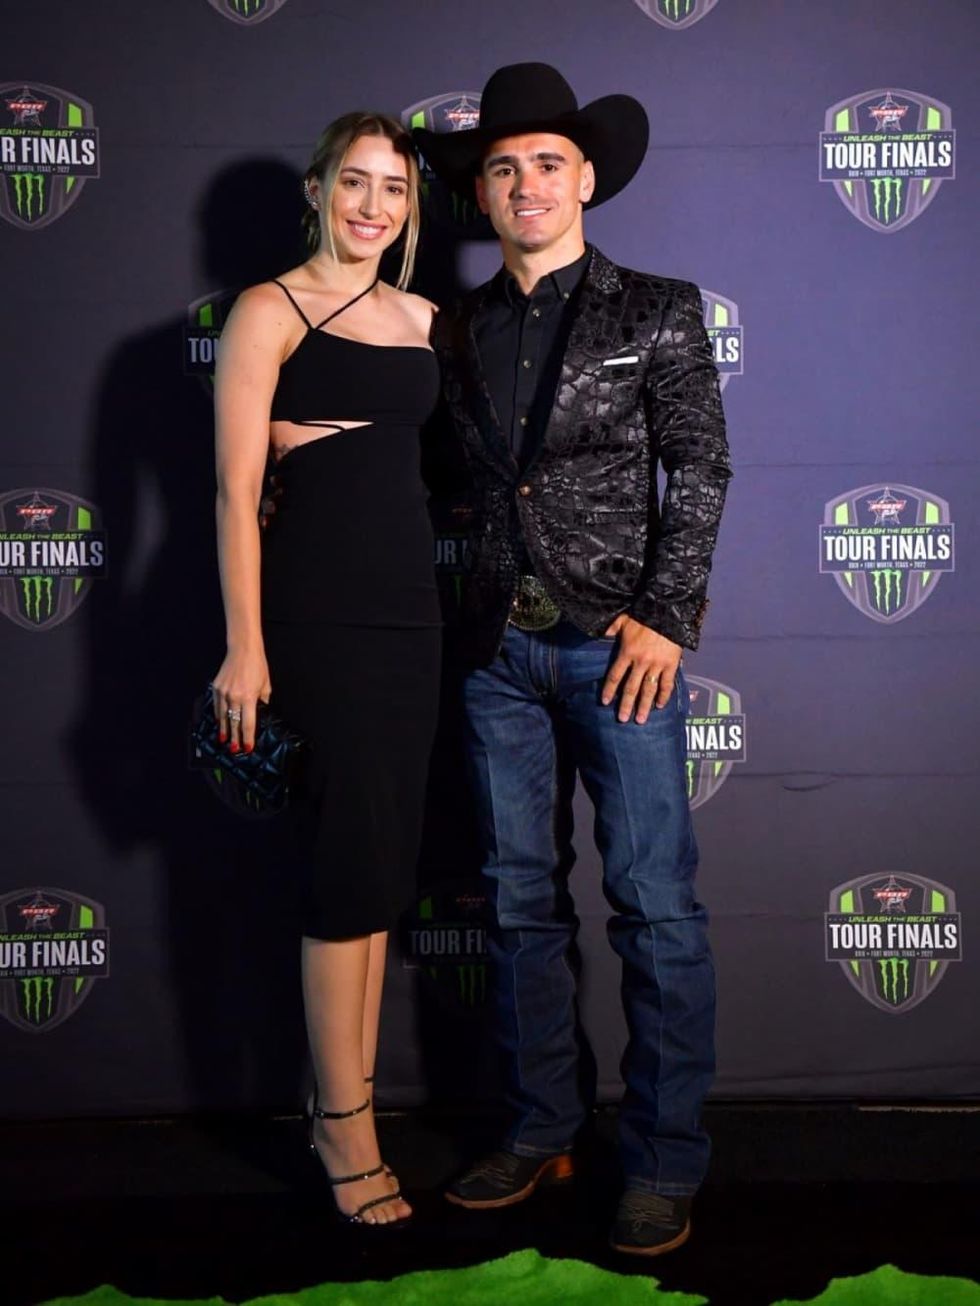 PBR World Finals kicks off in Fort Worth with glamorous awards gala